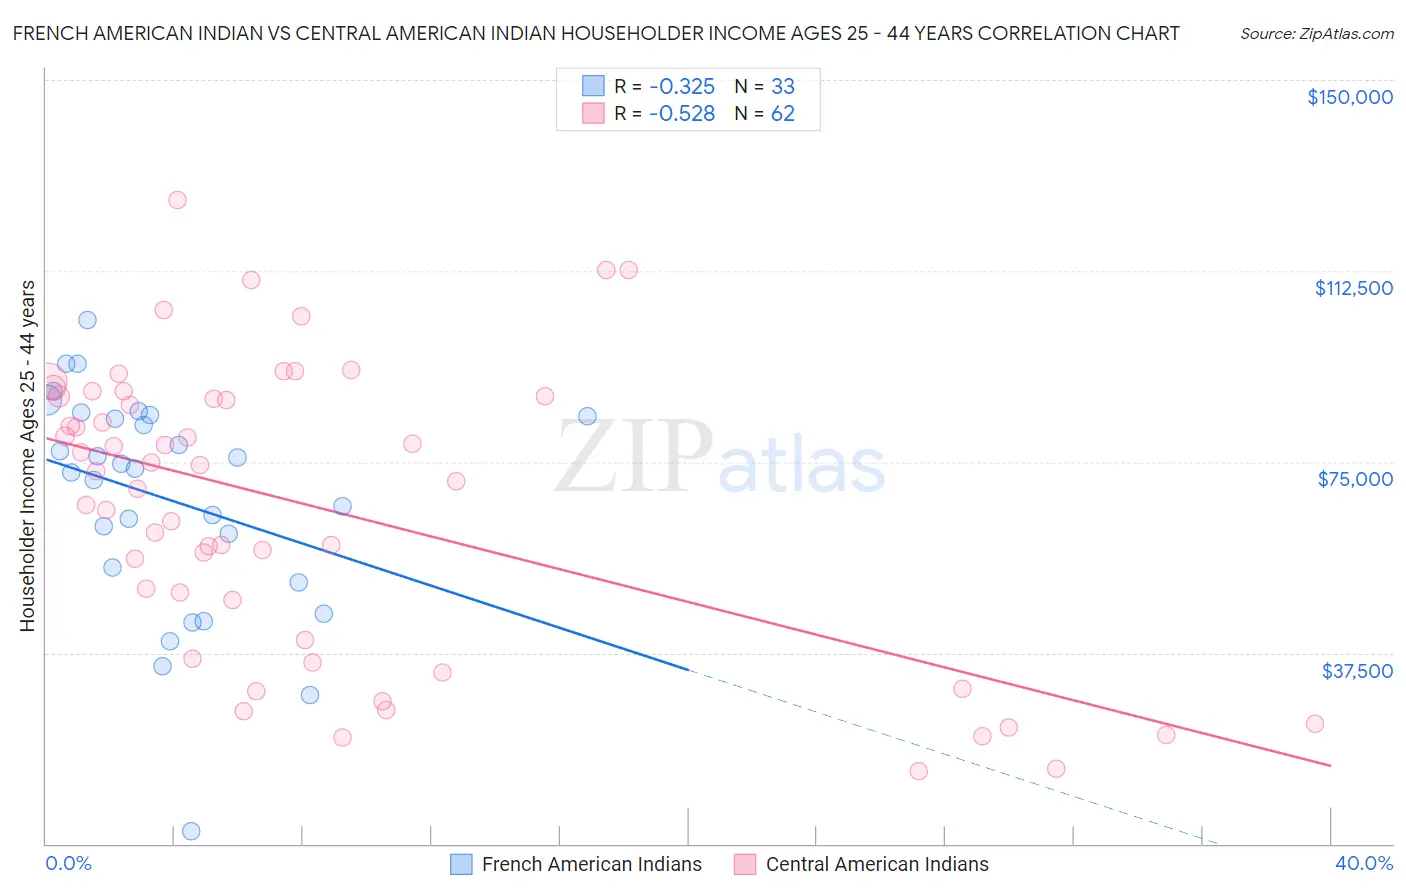 French American Indian vs Central American Indian Householder Income Ages 25 - 44 years